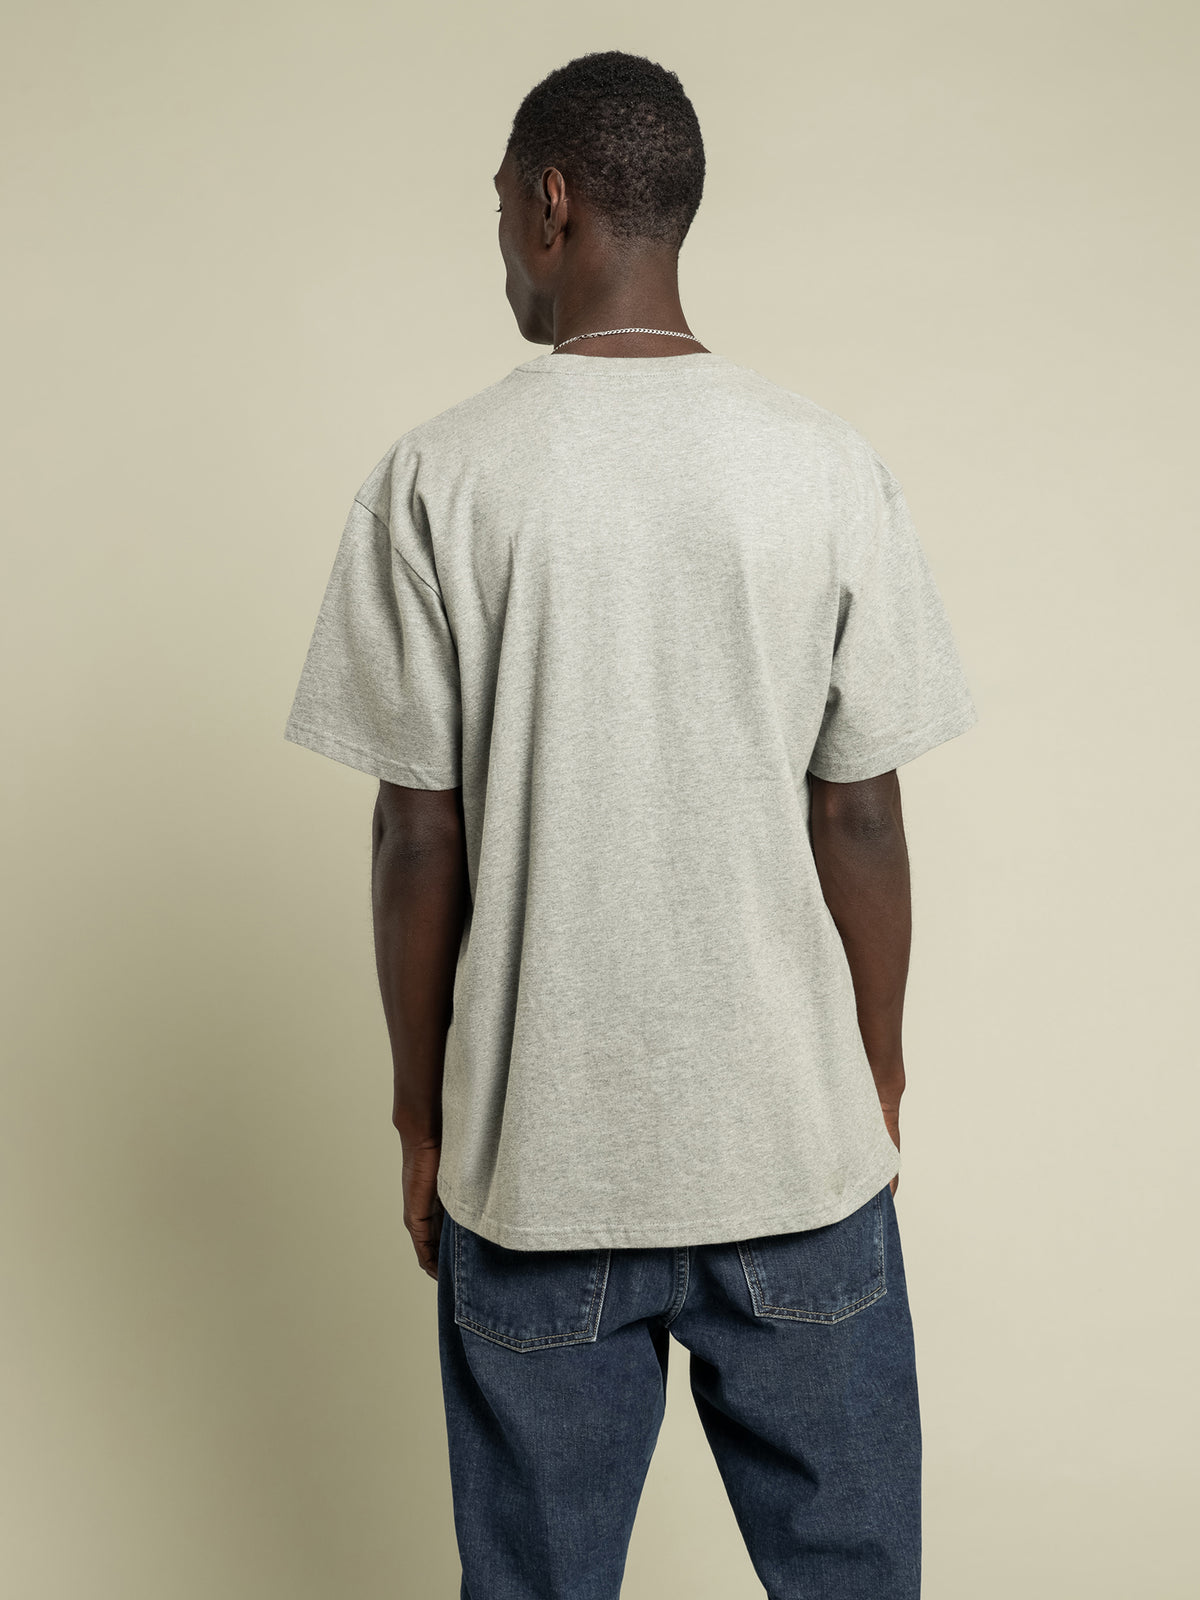 Chase T-Shirt in Grey